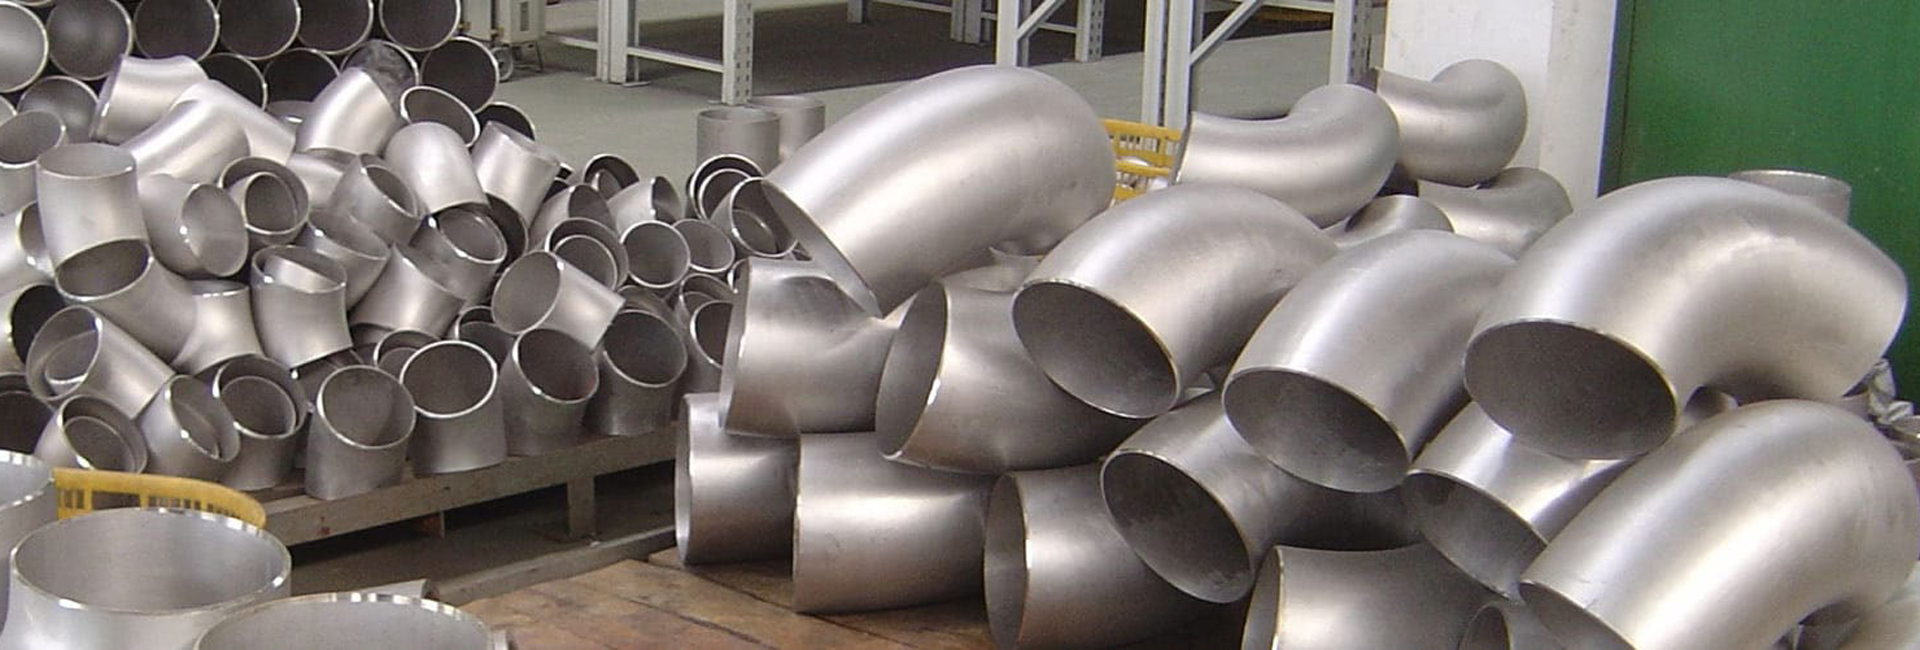                                 Stainless Steel Buttweld Pipe Fittings